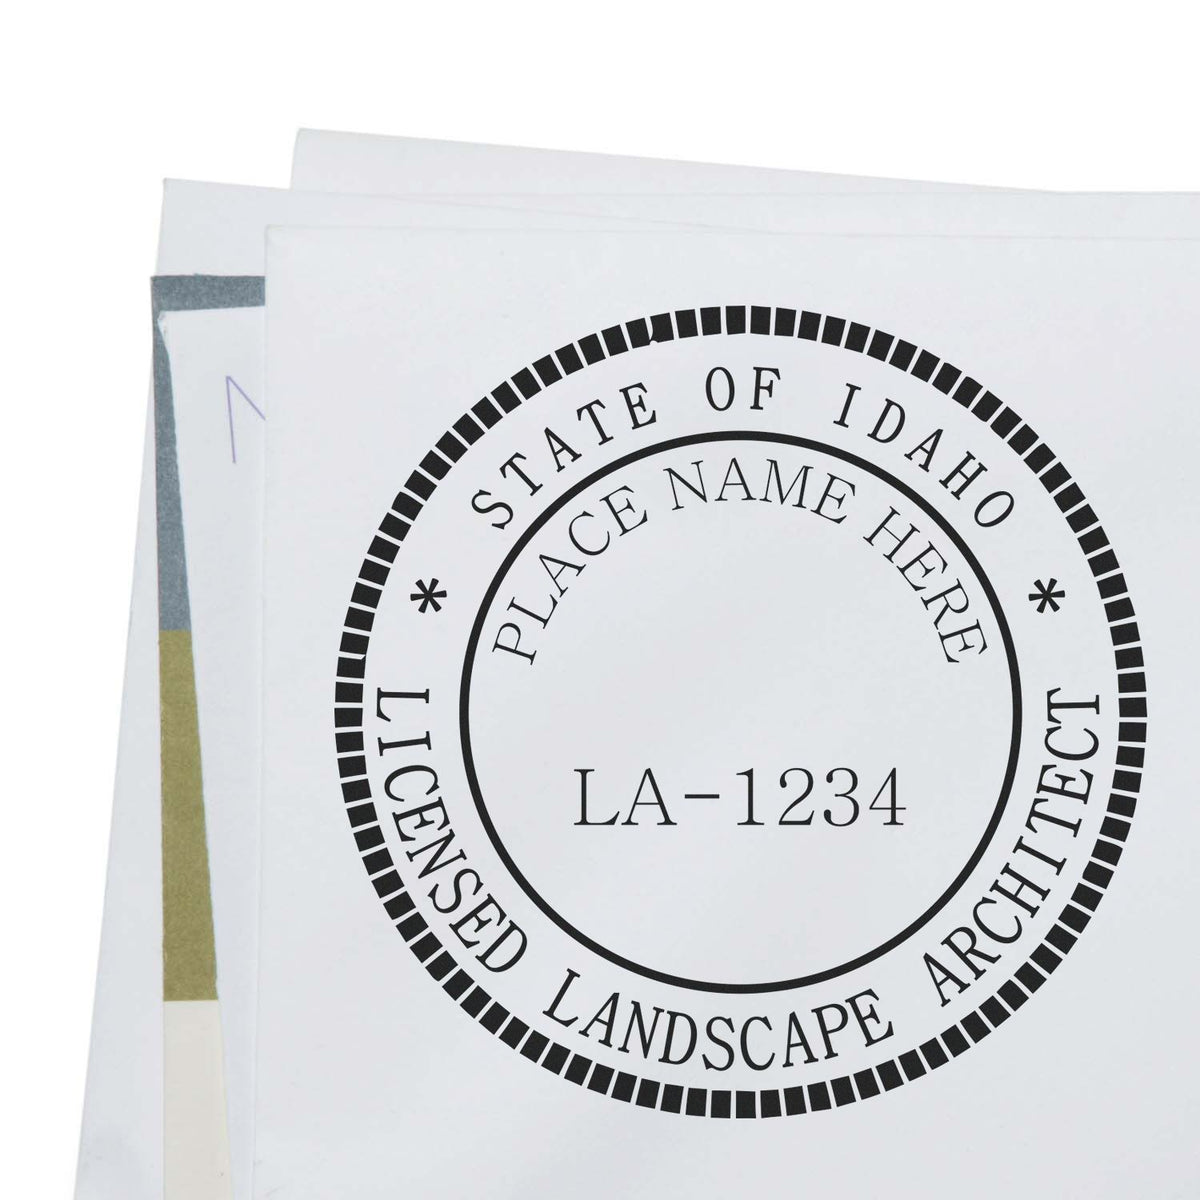 This paper is stamped with a sample imprint of the Premium MaxLight Pre-Inked Idaho Landscape Architectural Stamp, signifying its quality and reliability.